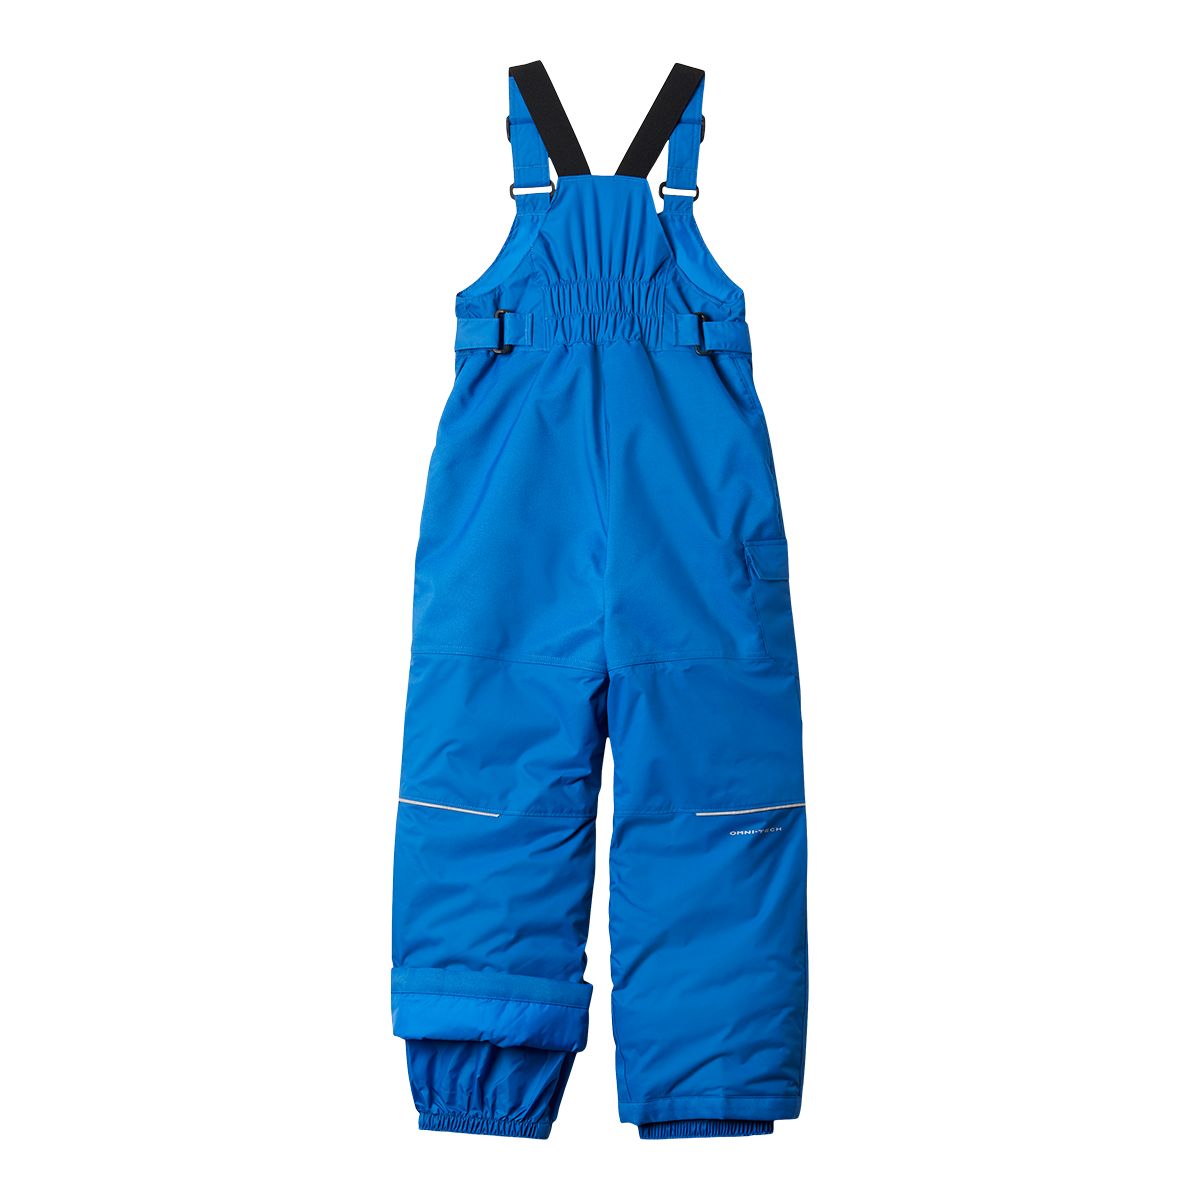 https://media-www.sportchek.ca/product/div-03-softgoods/dpt-76-outerwear/sdpt-03-boys/333861094/columbia-y-adventure-ride-bib-pant-q322-blue-5d8c3677-0209-4cb4-b75c-8f28d71dd9d4-jpgrendition.jpg?imdensity=1&imwidth=1244&impolicy=mZoom